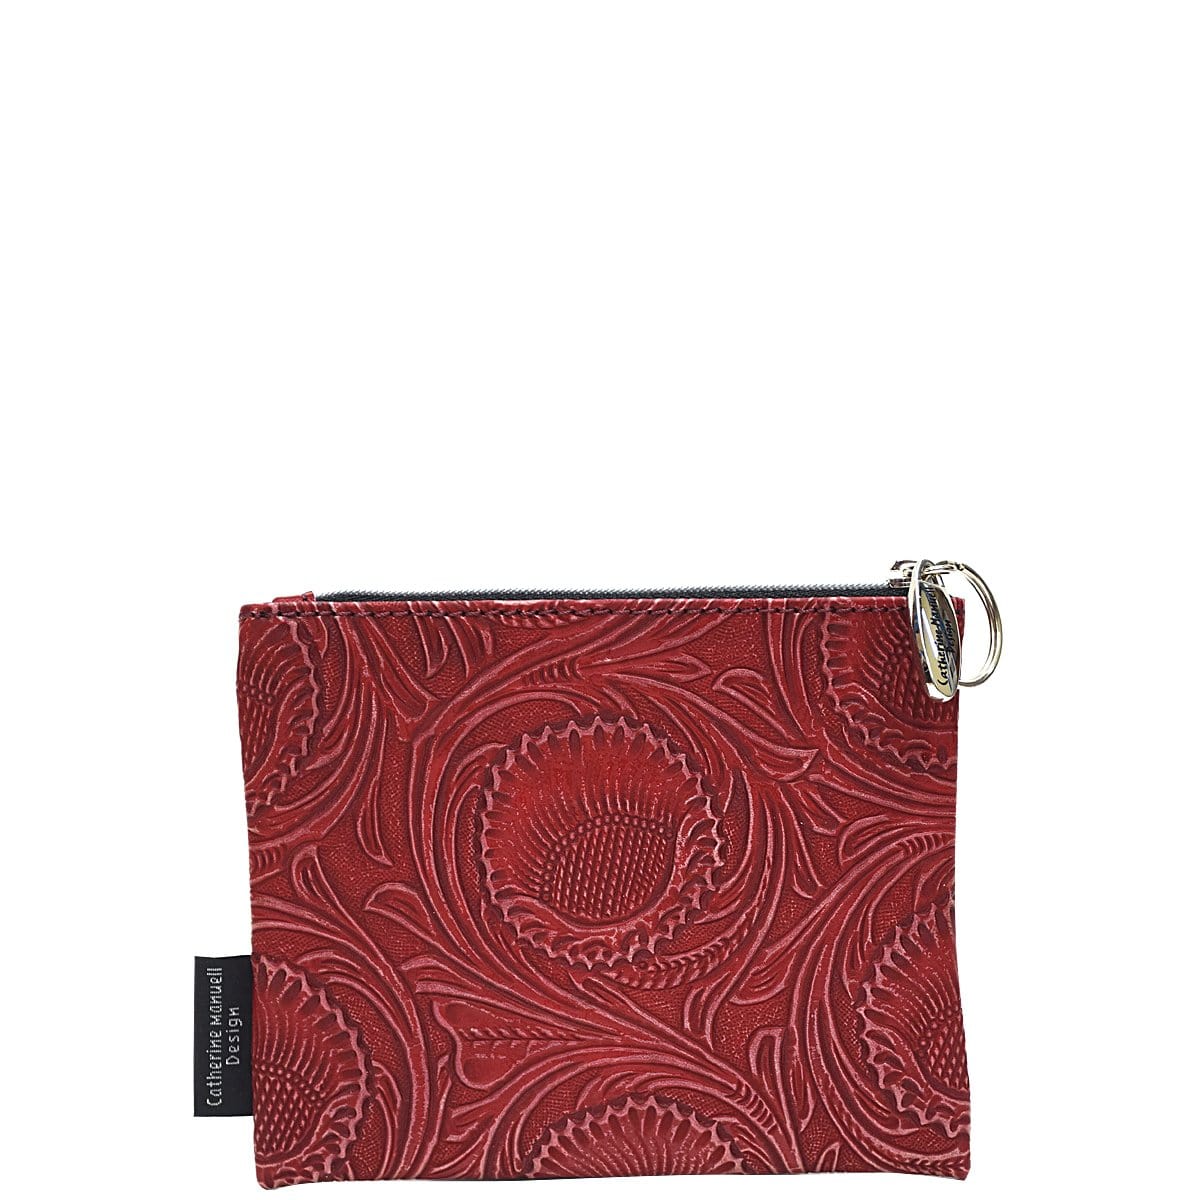 Everyday Purse - Red Thistle